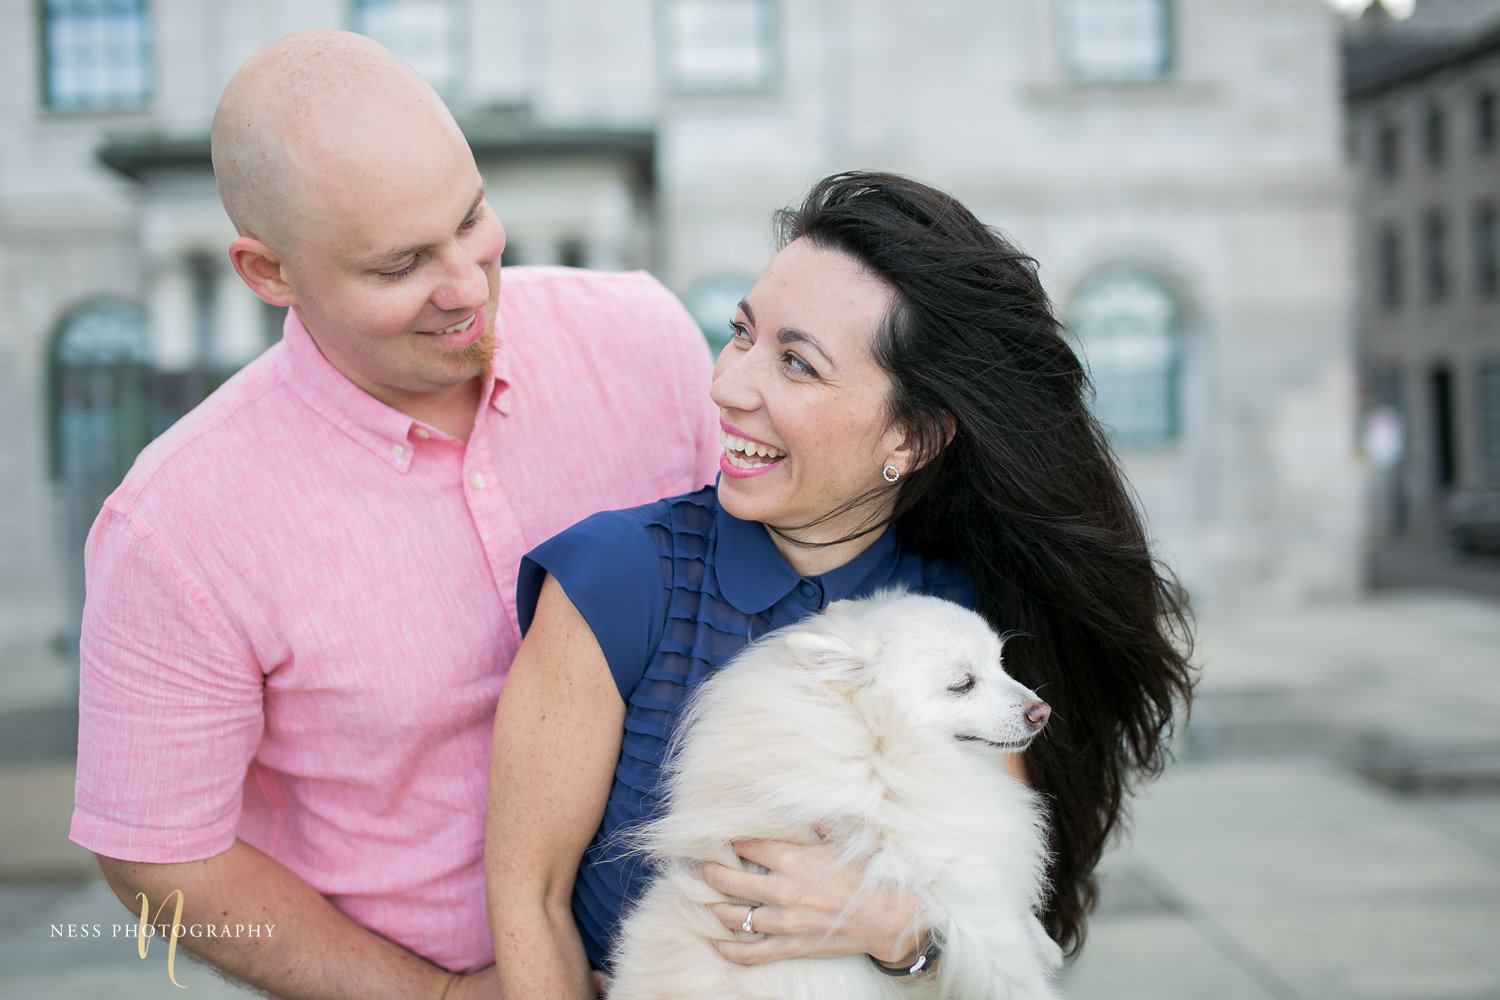 Adelina & Dan Engagement Photos Old Port Montreal with white dog By Ness Photography Wedding and Engagement Photographer 118.jpg